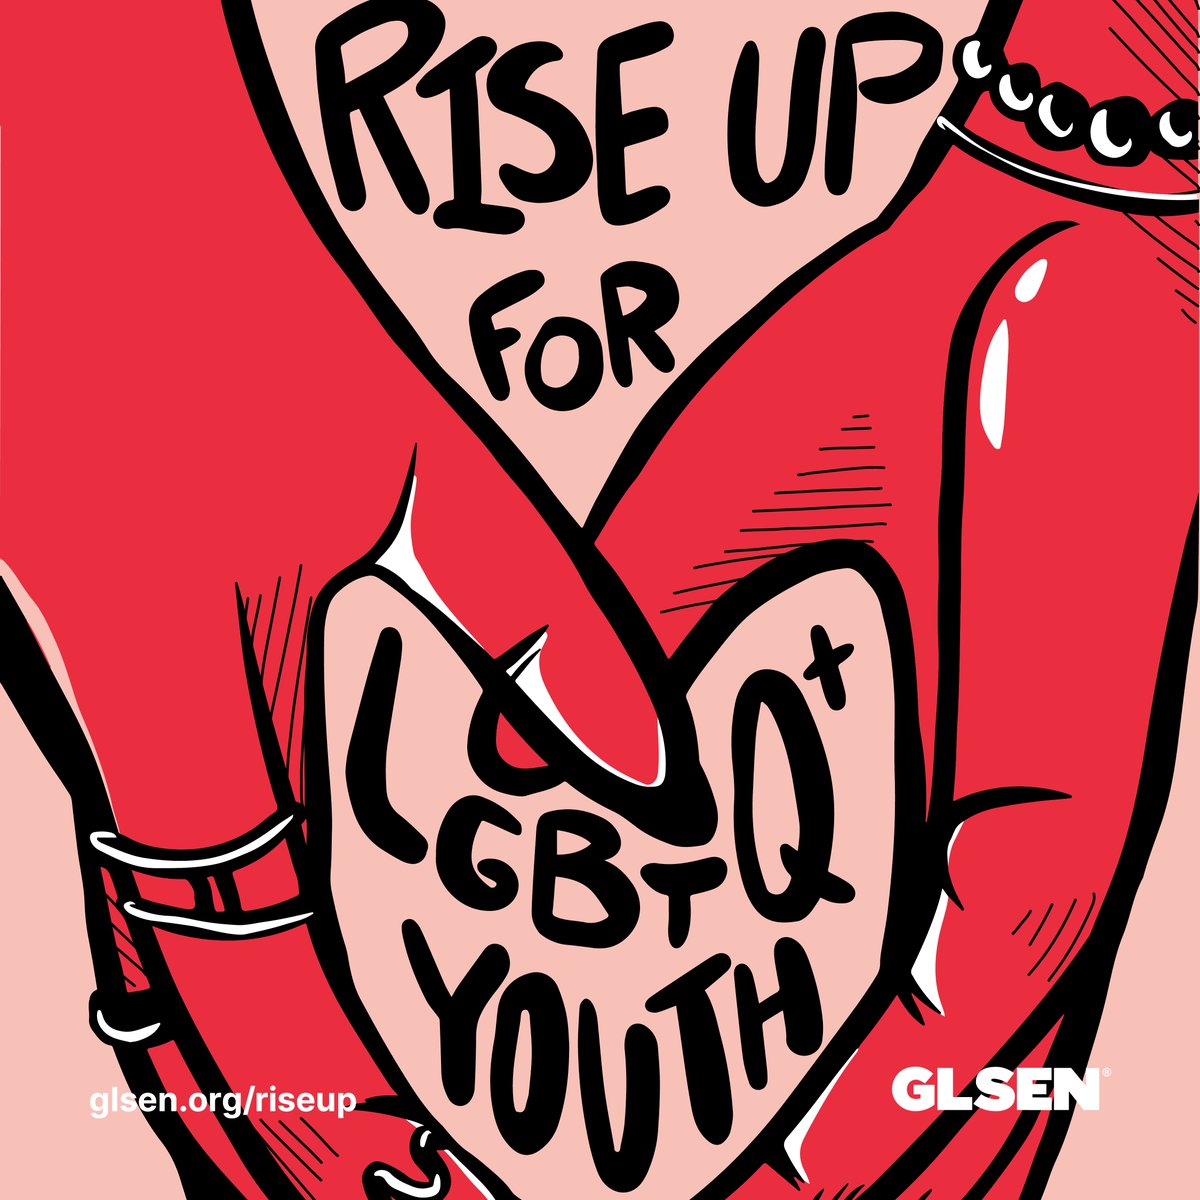 We must seek to transform narratives that deepen hate by supporting LGBTQ+ young people in public ways.

Sign the pledge today ➡️ glsen.org/riseup 

#RiseUp4LGBTQ